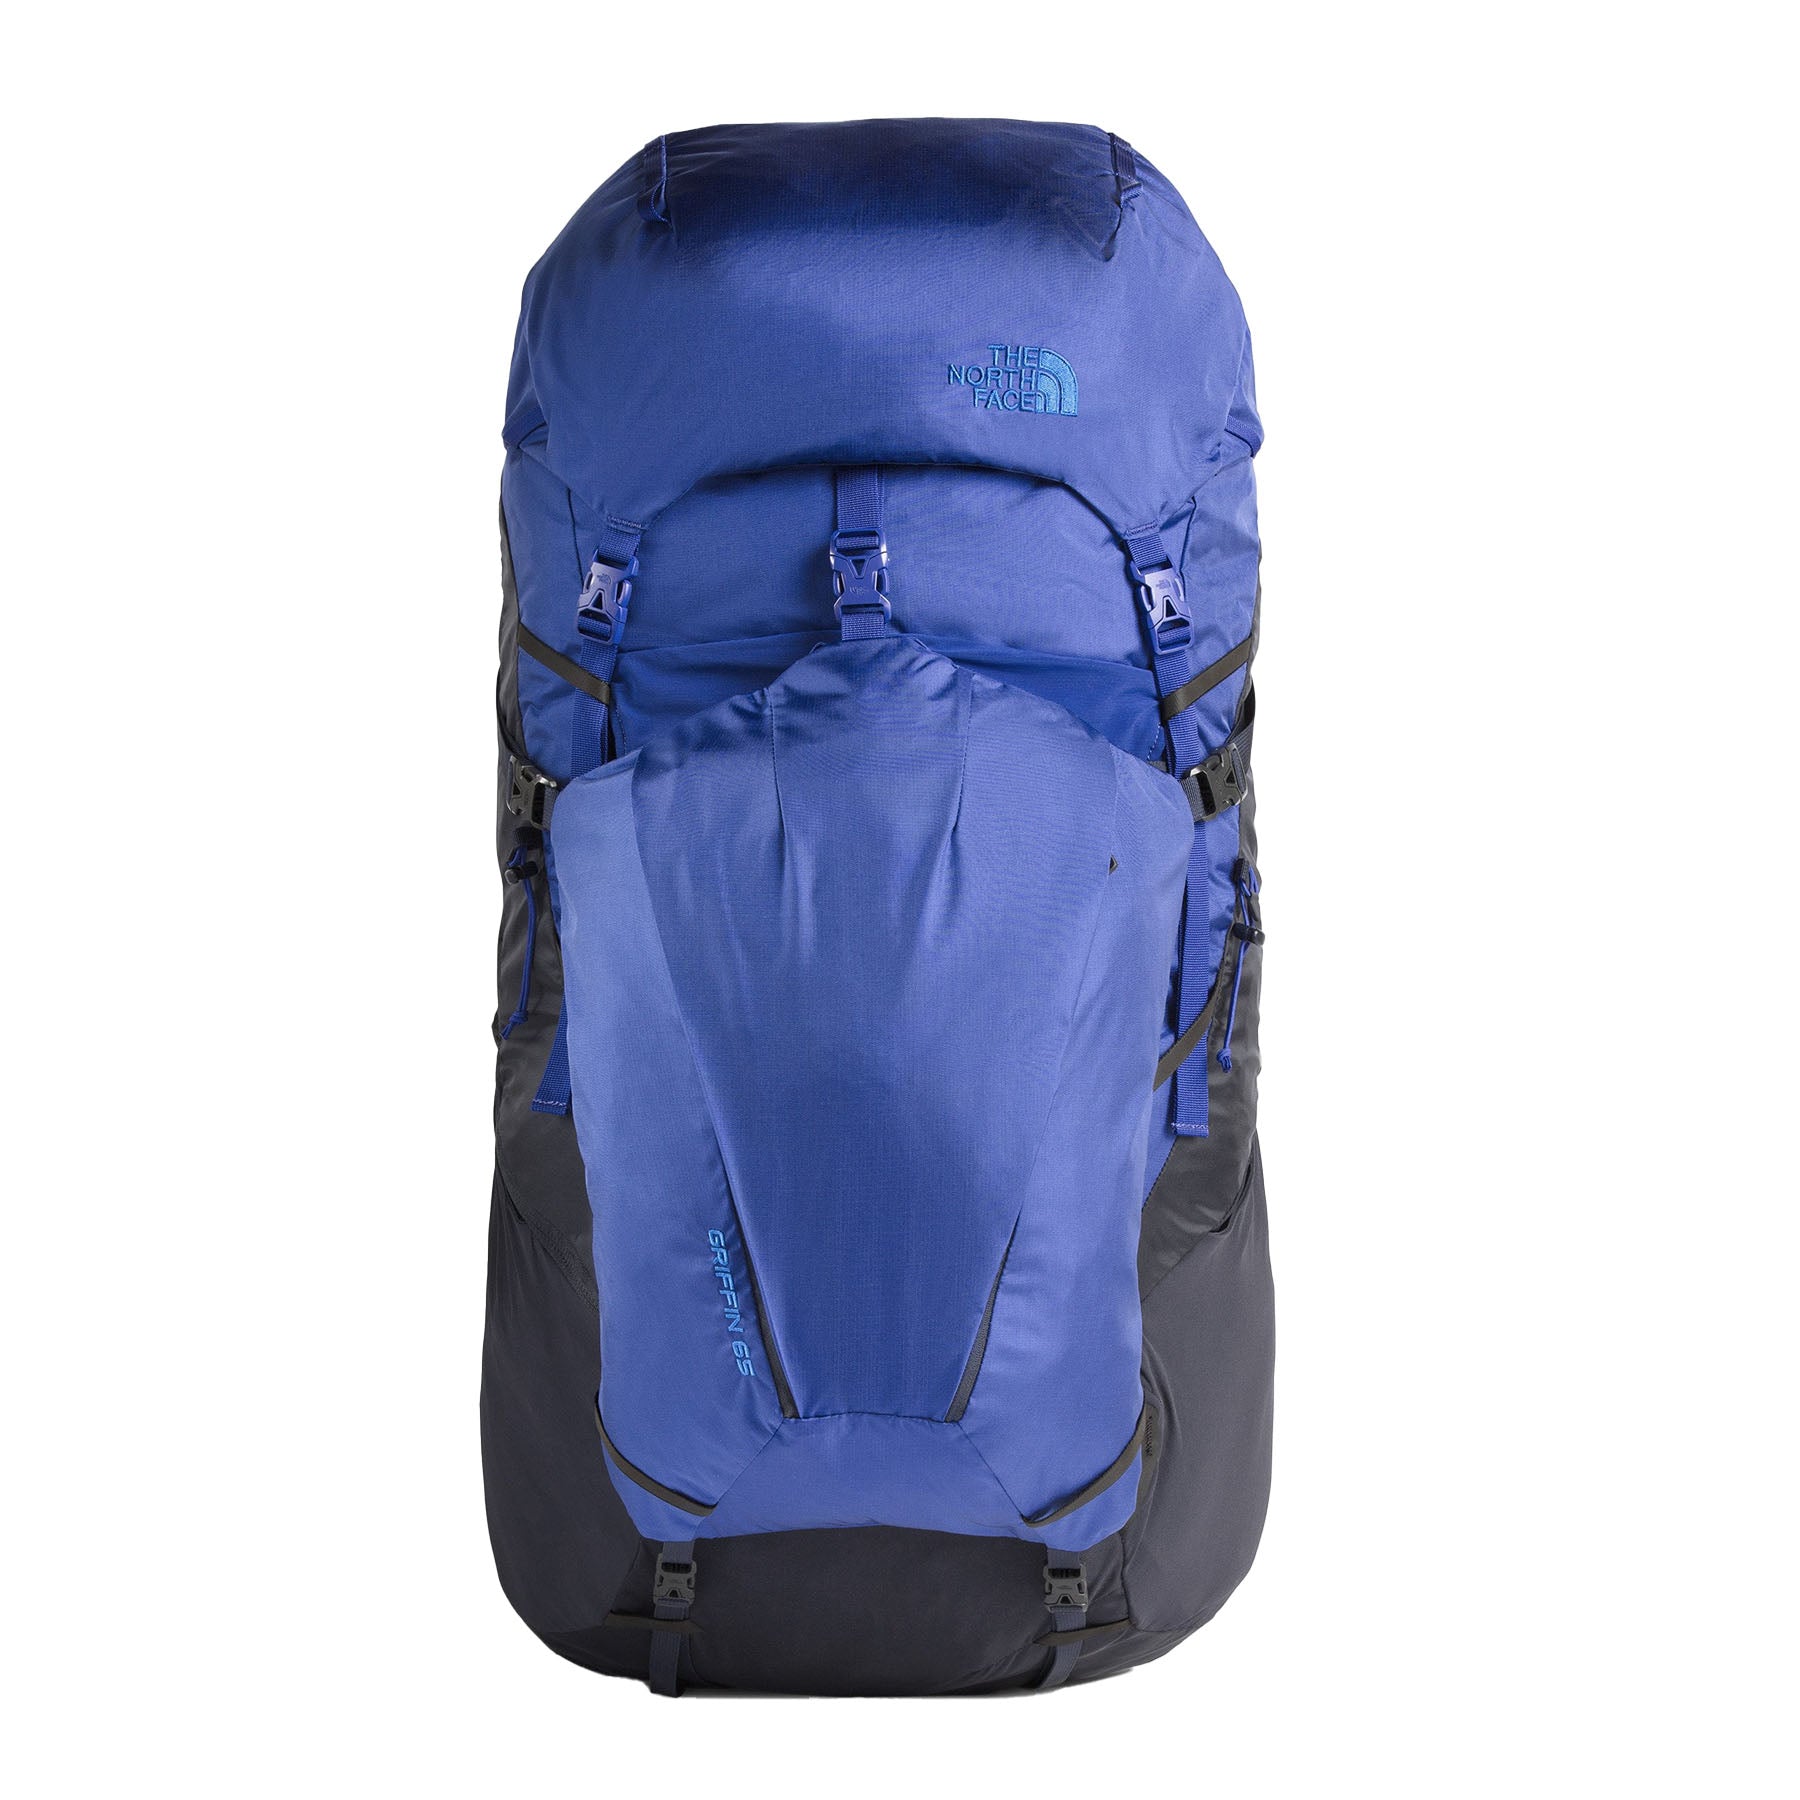 The North Face Griffin 65 Backpack - L/XL - Urban Navy/Bright Cobalt Blue